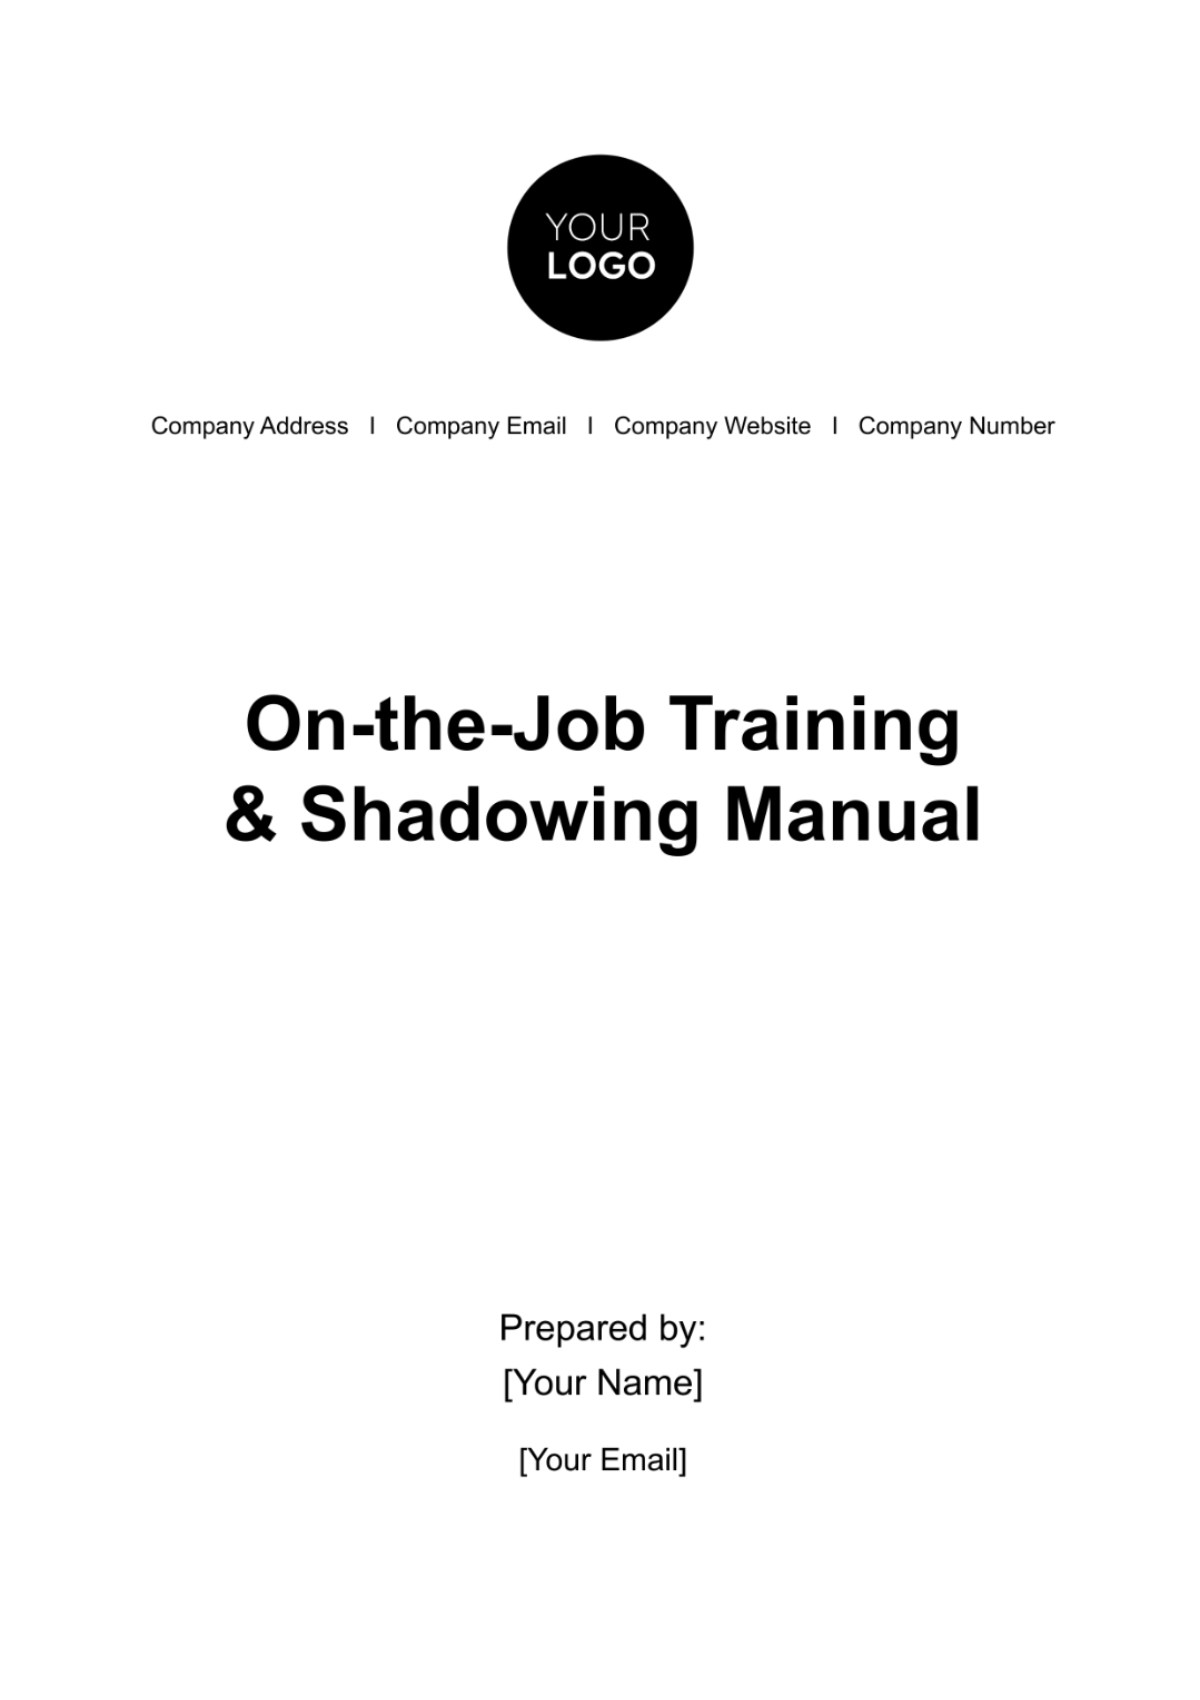 Free On-the-job Training & Shadowing Manual HR Template